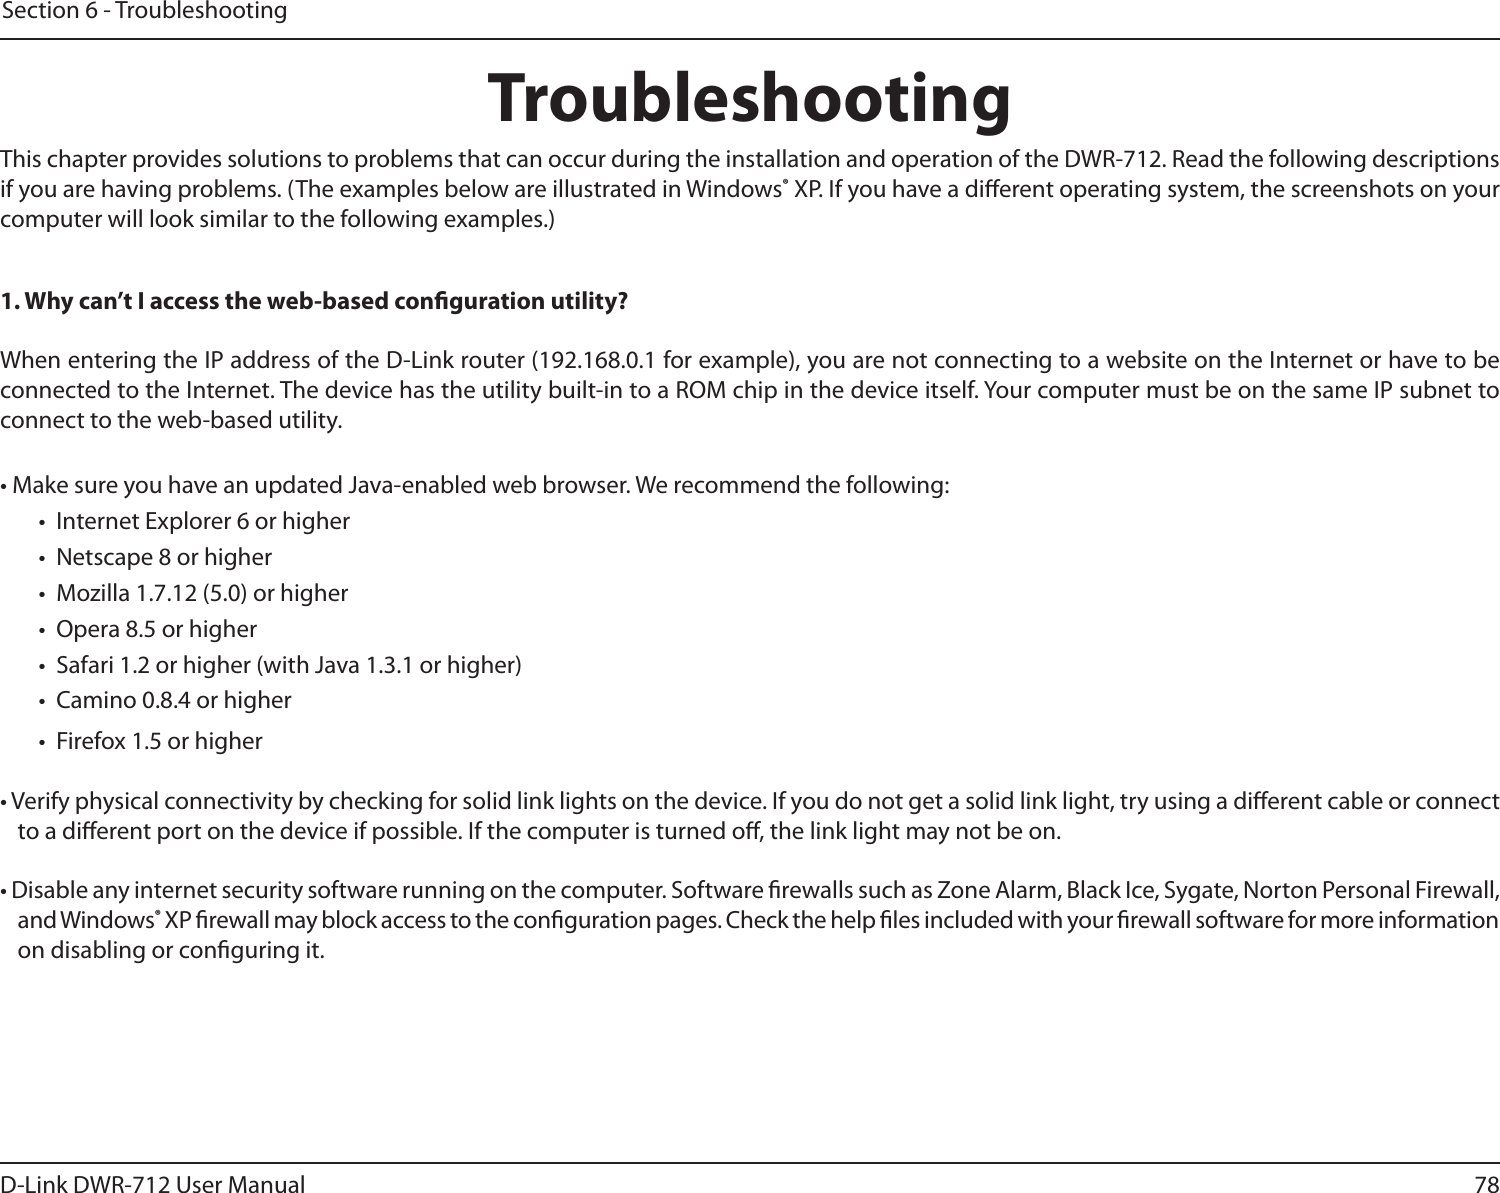 78D-Link DWR-712 User ManualSection 6 - TroubleshootingTroubleshootingThis chapter provides solutions to problems that can occur during the installation and operation of the DWR-712. Read the following descriptions if you are having problems. (The examples below are illustrated in Windows® XP. If you have a dierent operating system, the screenshots on your computer will look similar to the following examples.)1. Why can’t I access the web-based conguration utility?When entering the IP address of the D-Link router (192.168.0.1 for example), you are not connecting to a website on the Internet or have to be connected to the Internet. The device has the utility built-in to a ROM chip in the device itself. Your computer must be on the same IP subnet to connect to the web-based utility. • Make sure you have an updated Java-enabled web browser. We recommend the following: •  Internet Explorer 6 or higher •  Netscape 8 or higher •  Mozilla 1.7.12 (5.0) or higher •  Opera 8.5 or higher •  Safari 1.2 or higher (with Java 1.3.1 or higher) •  Camino 0.8.4 or higher •  Firefox 1.5 or higher • Verify physical connectivity by checking for solid link lights on the device. If you do not get a solid link light, try using a dierent cable or connect to a dierent port on the device if possible. If the computer is turned o, the link light may not be on.• Disable any internet security software running on the computer. Software rewalls such as Zone Alarm, Black Ice, Sygate, Norton Personal Firewall, and Windows® XP rewall may block access to the conguration pages. Check the help les included with your rewall software for more information on disabling or conguring it.